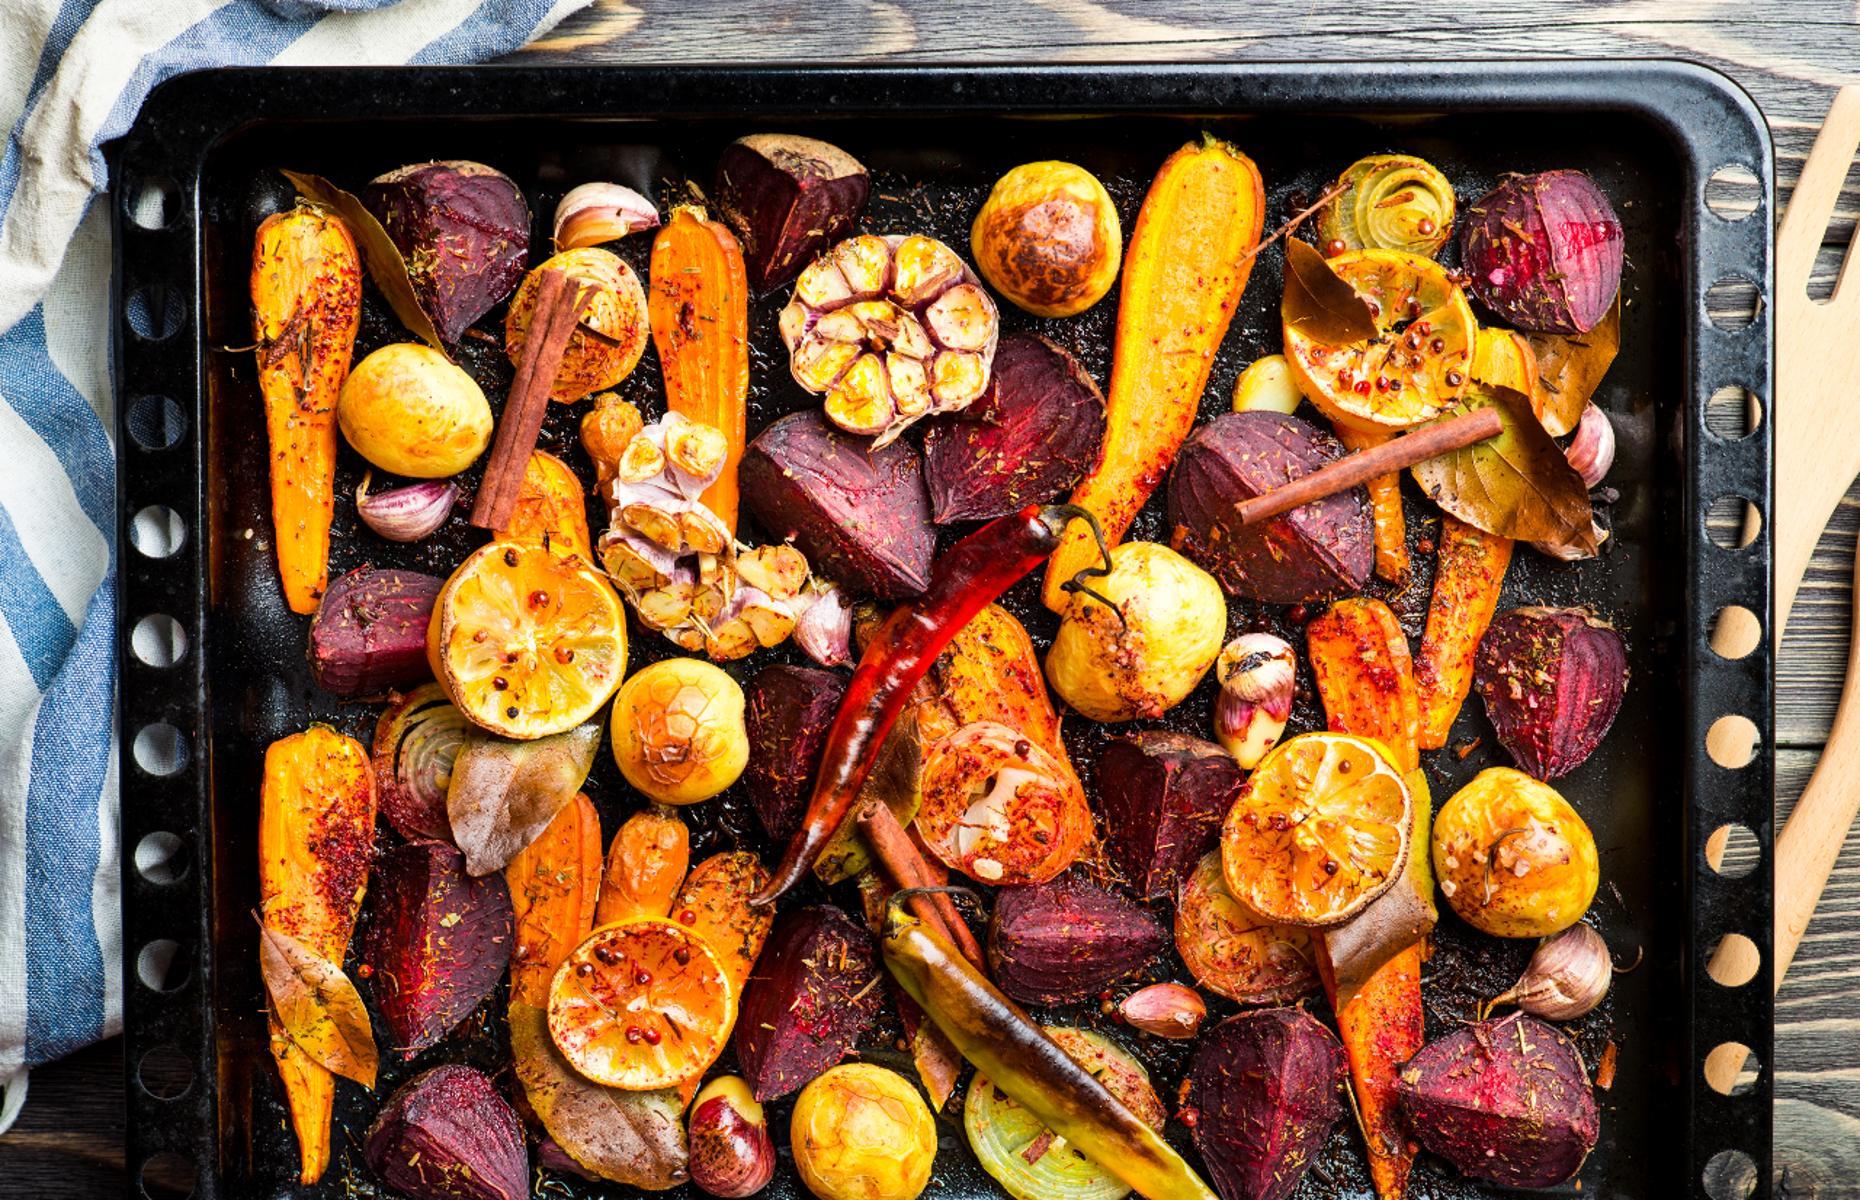 Roast vegetables for the win